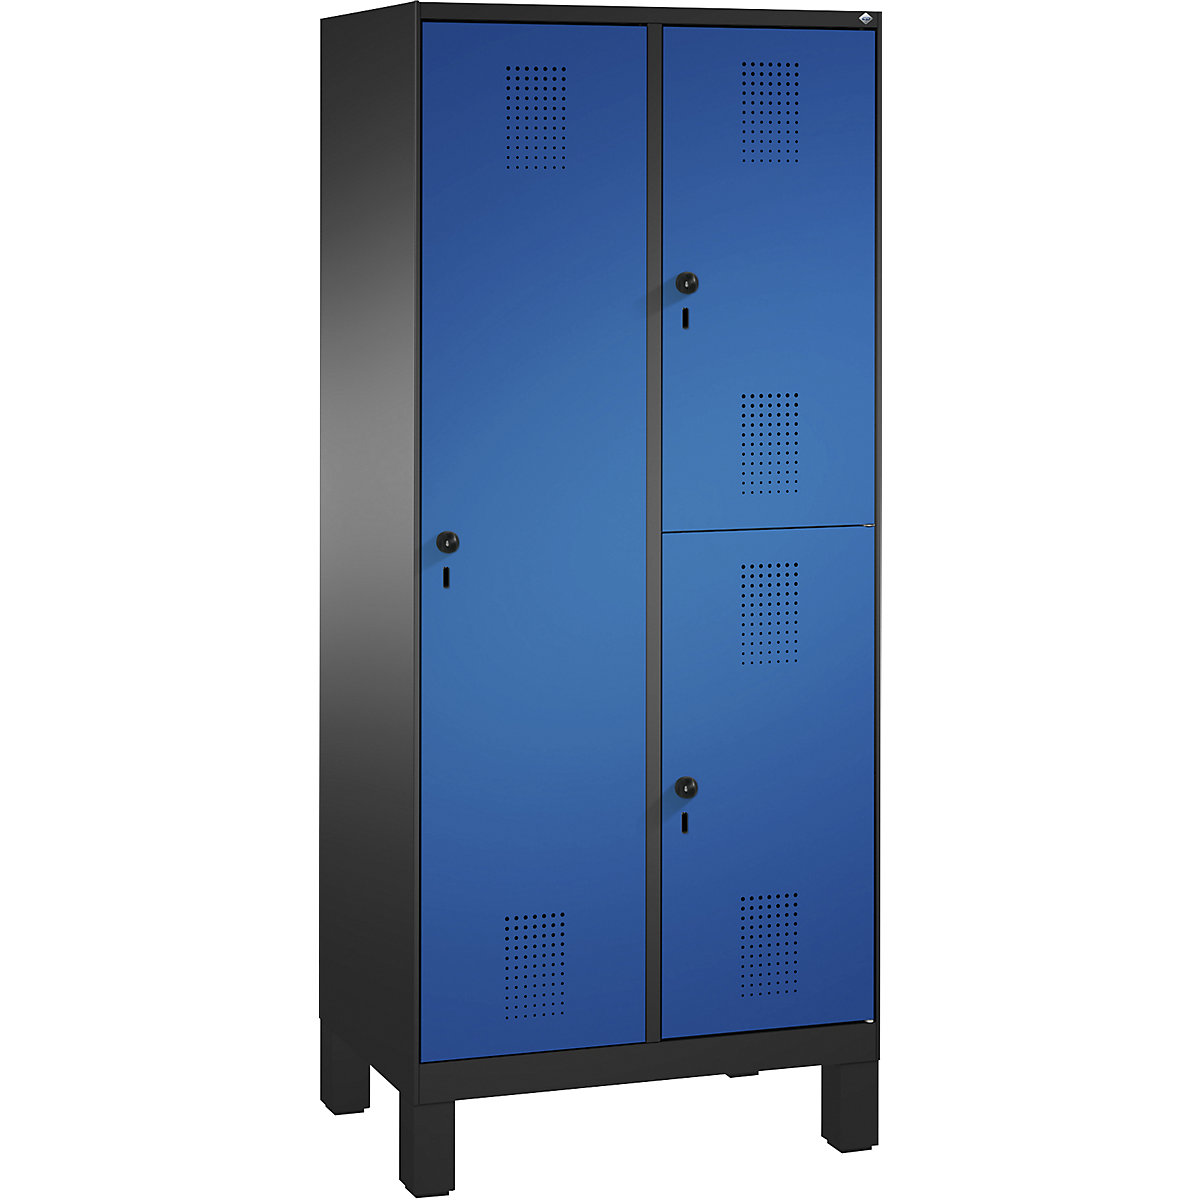 EVOLO combination cupboard, single and double tier – C+P, 2 compartments, 3 doors, compartment width 400 mm, with feet, black grey / gentian blue